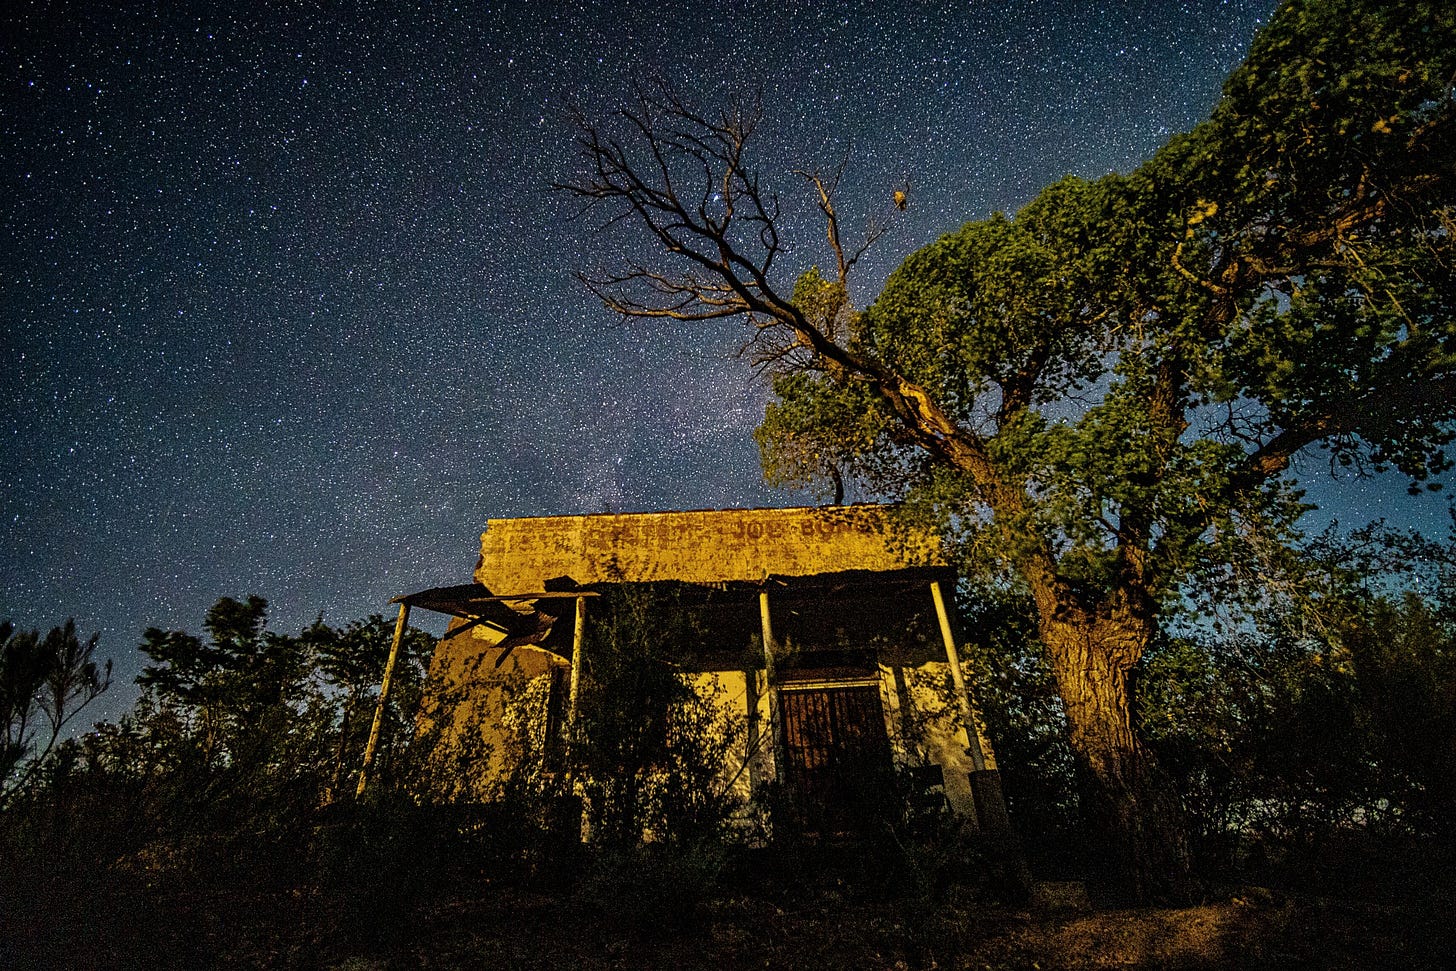 an old cabin and a large tree photographed at night